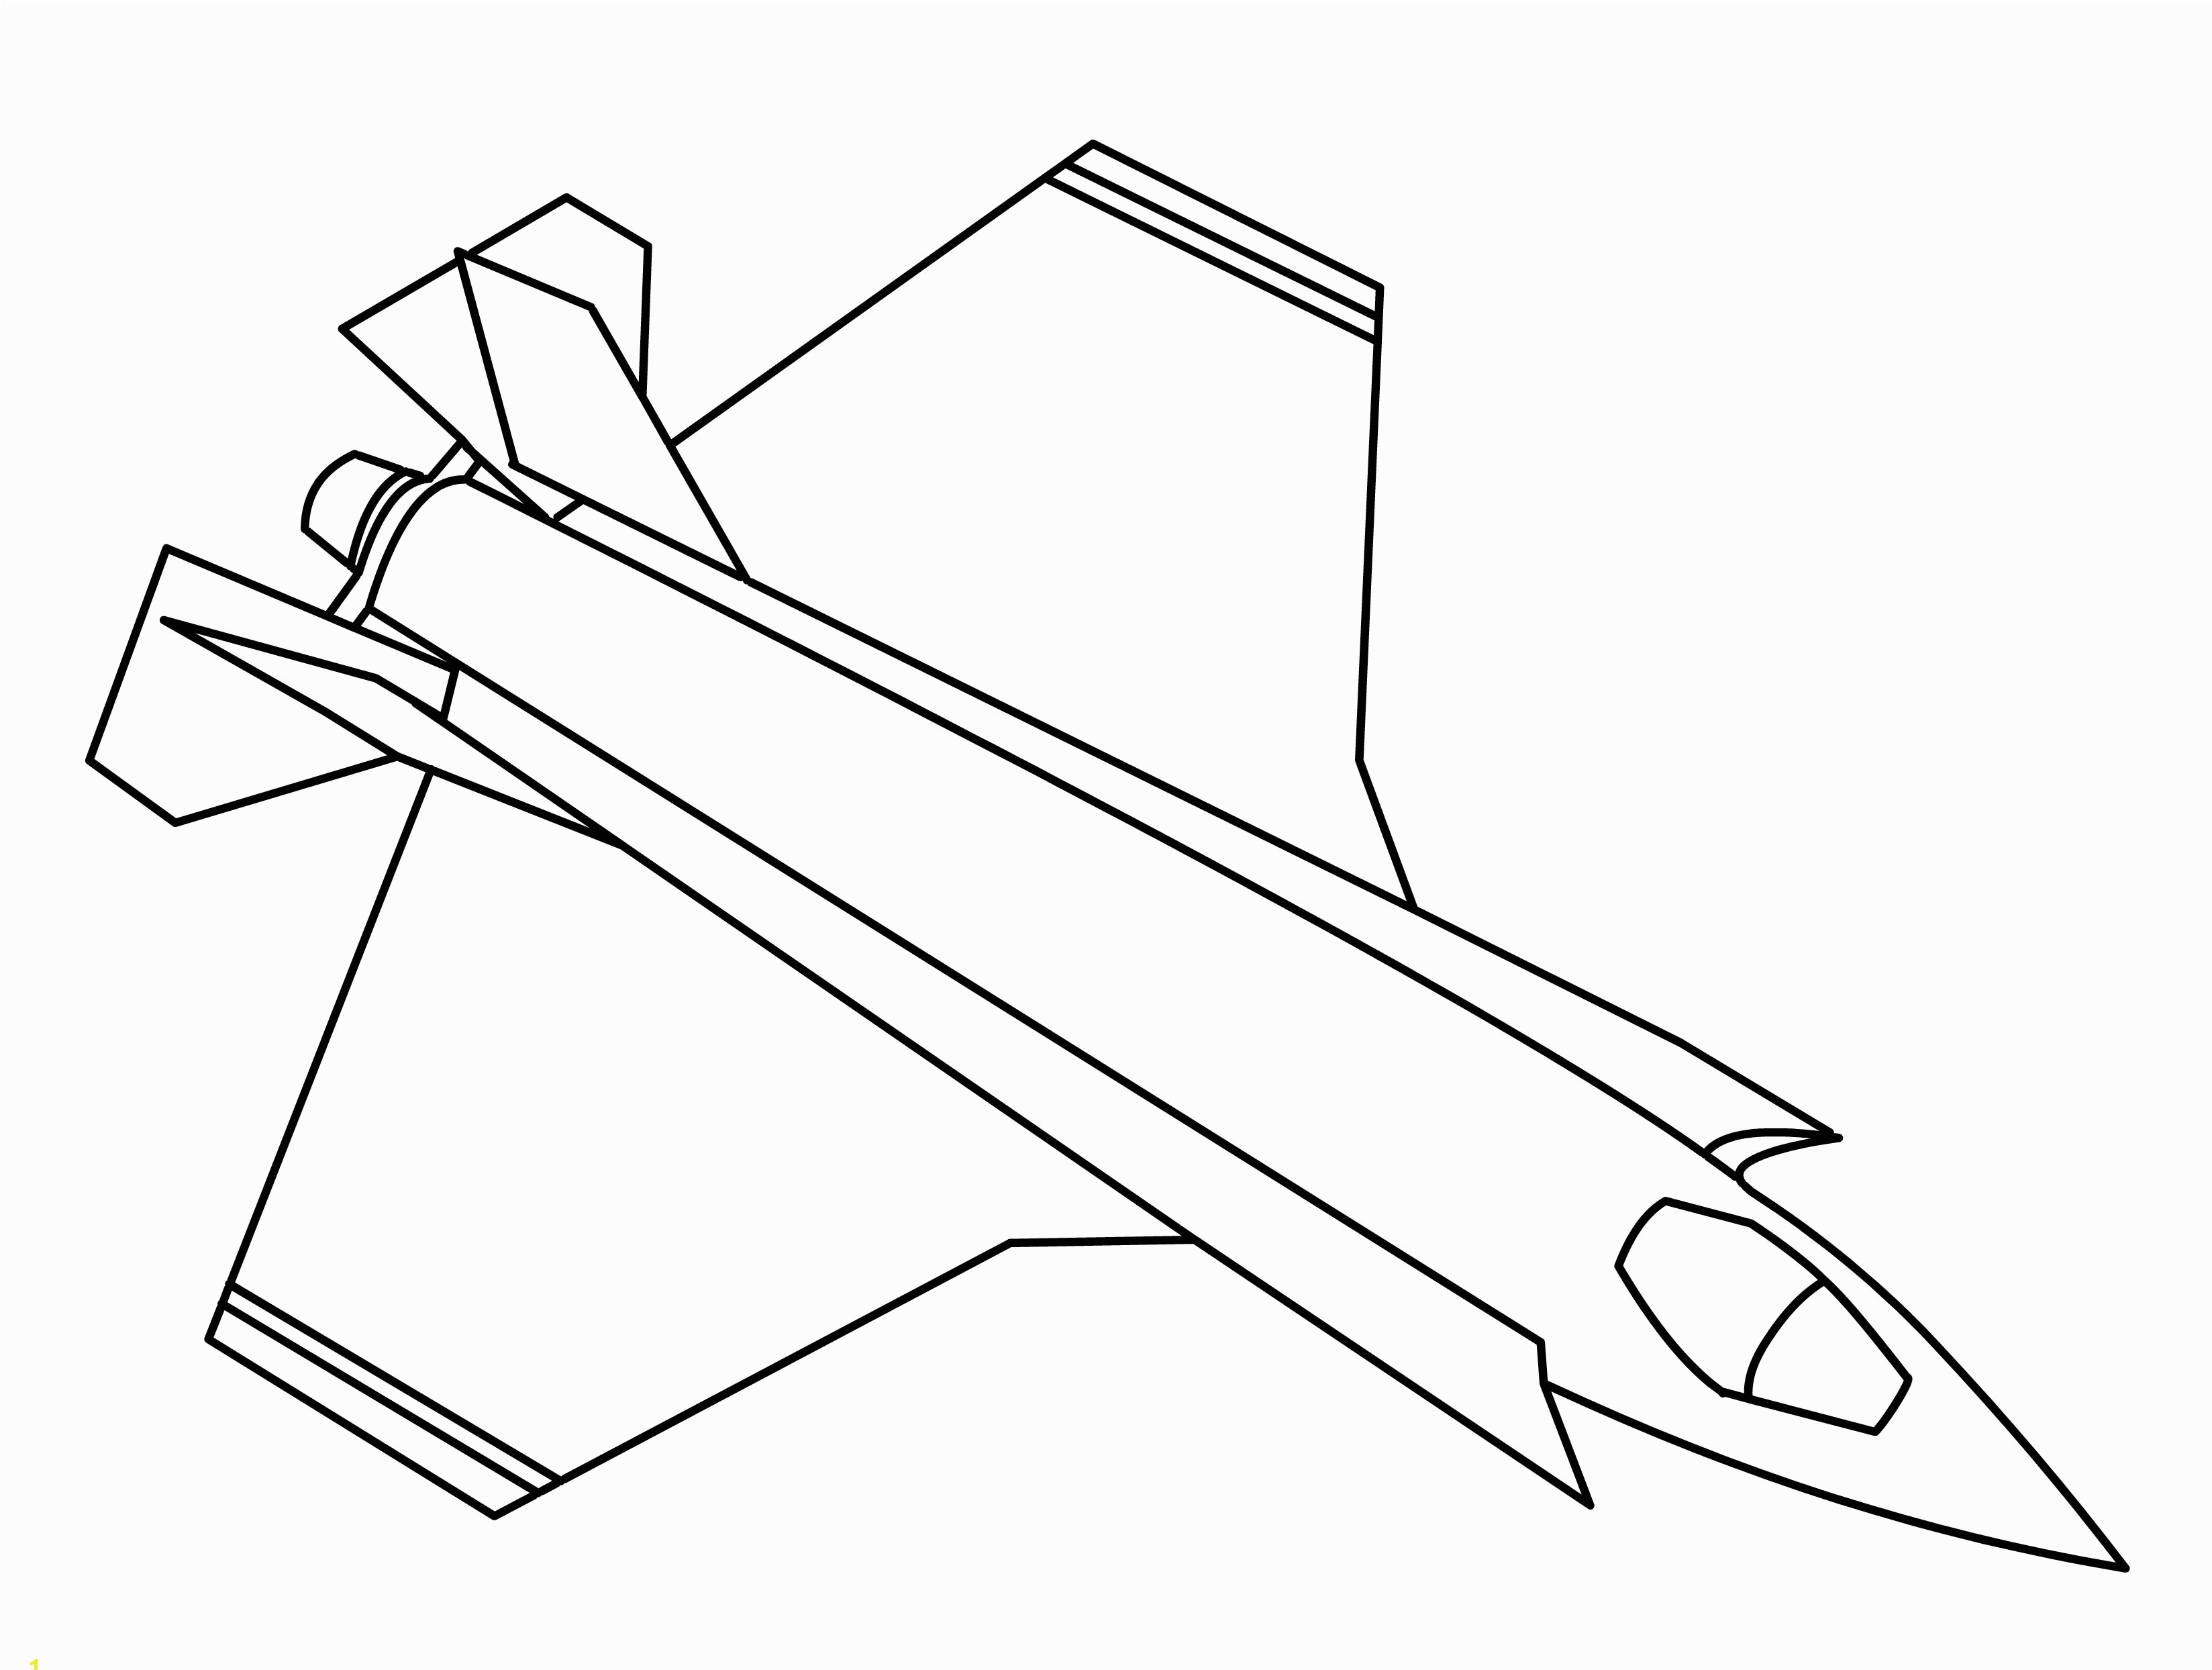 Blue Angels Coloring Pages Pdf to Print - Free Printable Blue Angels Coloring Pages